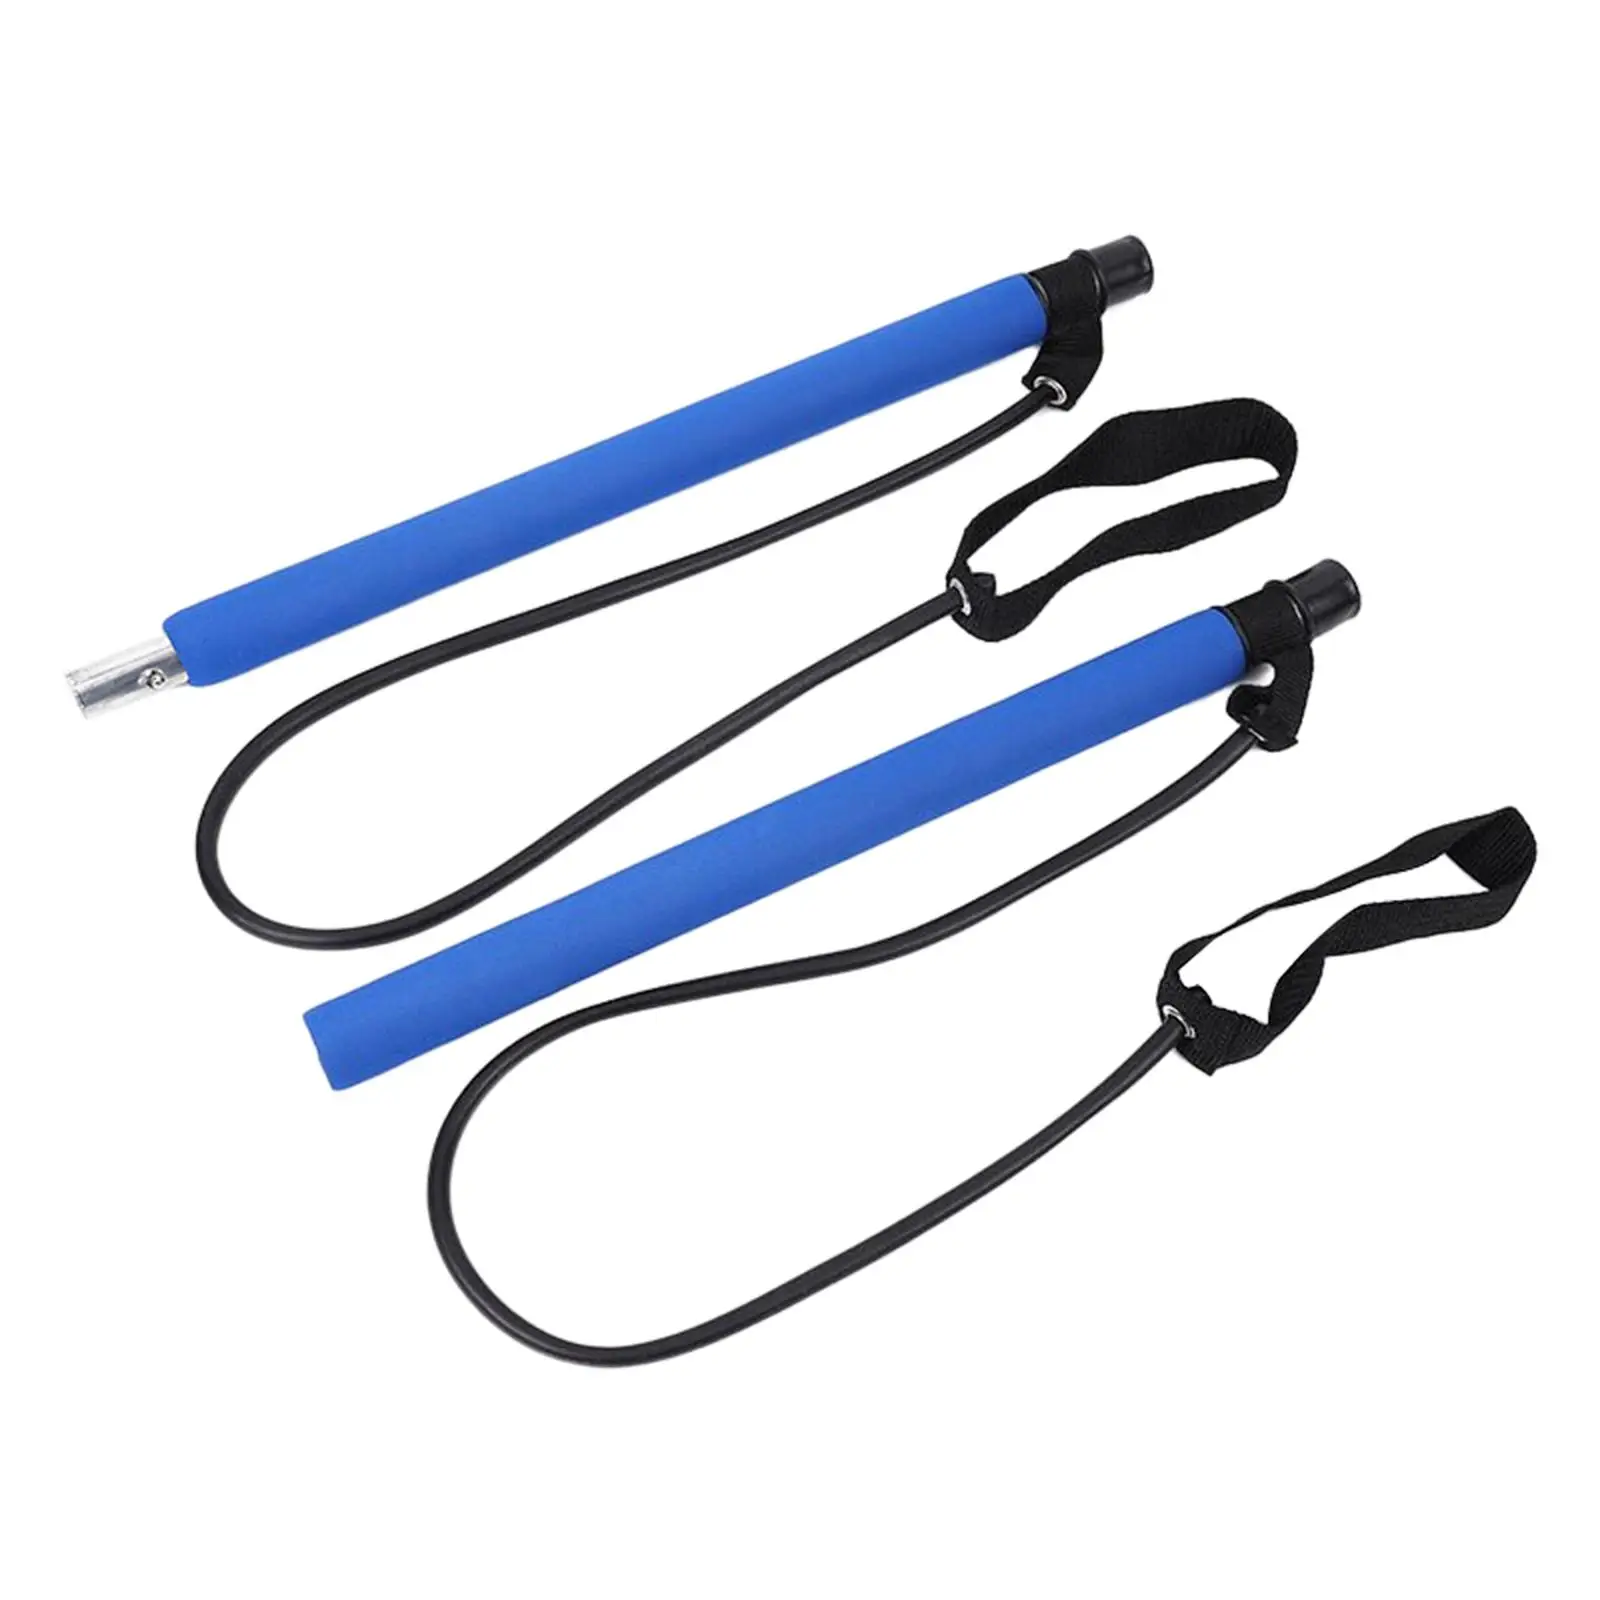 Pilates Bar Resistance Band Muscle Training Bar for Home Squat Exercise